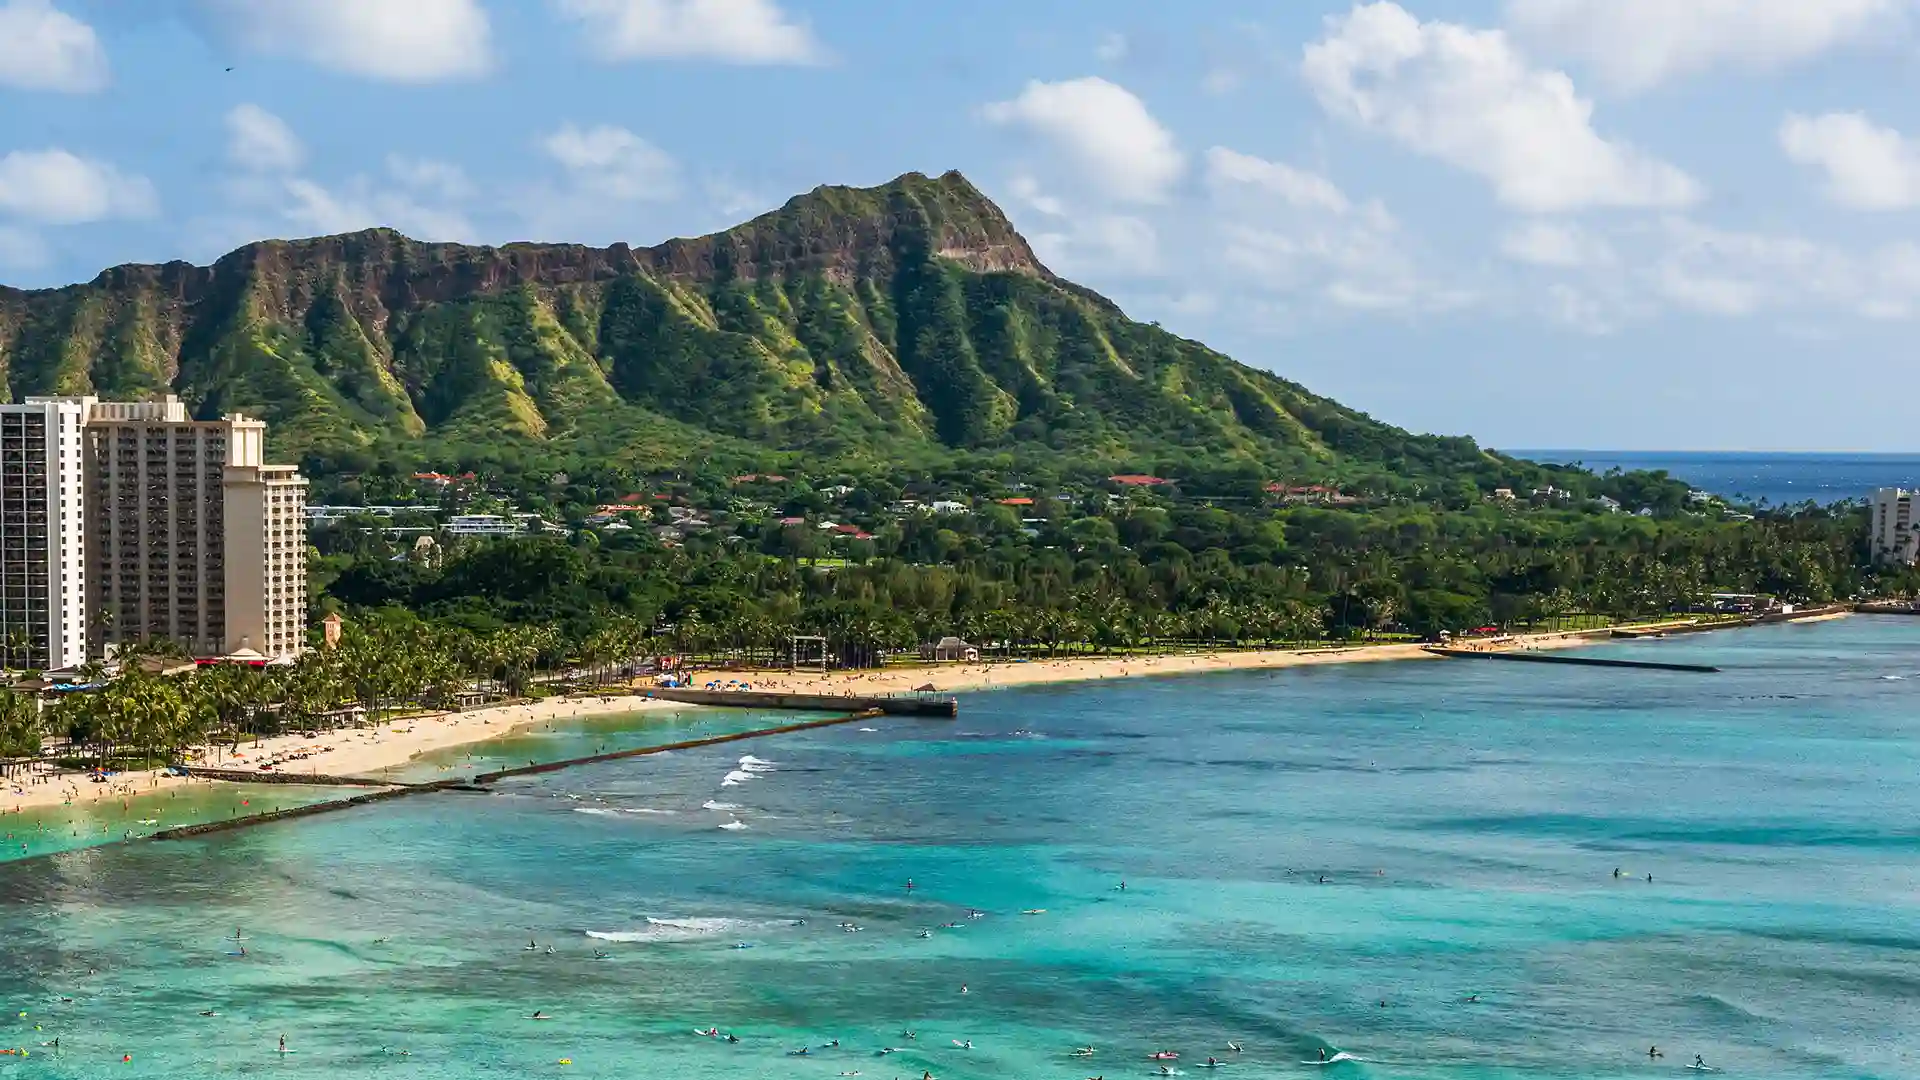 View of light blue ocean waters along the shore in Honolulu with a lush green landscape in the background.